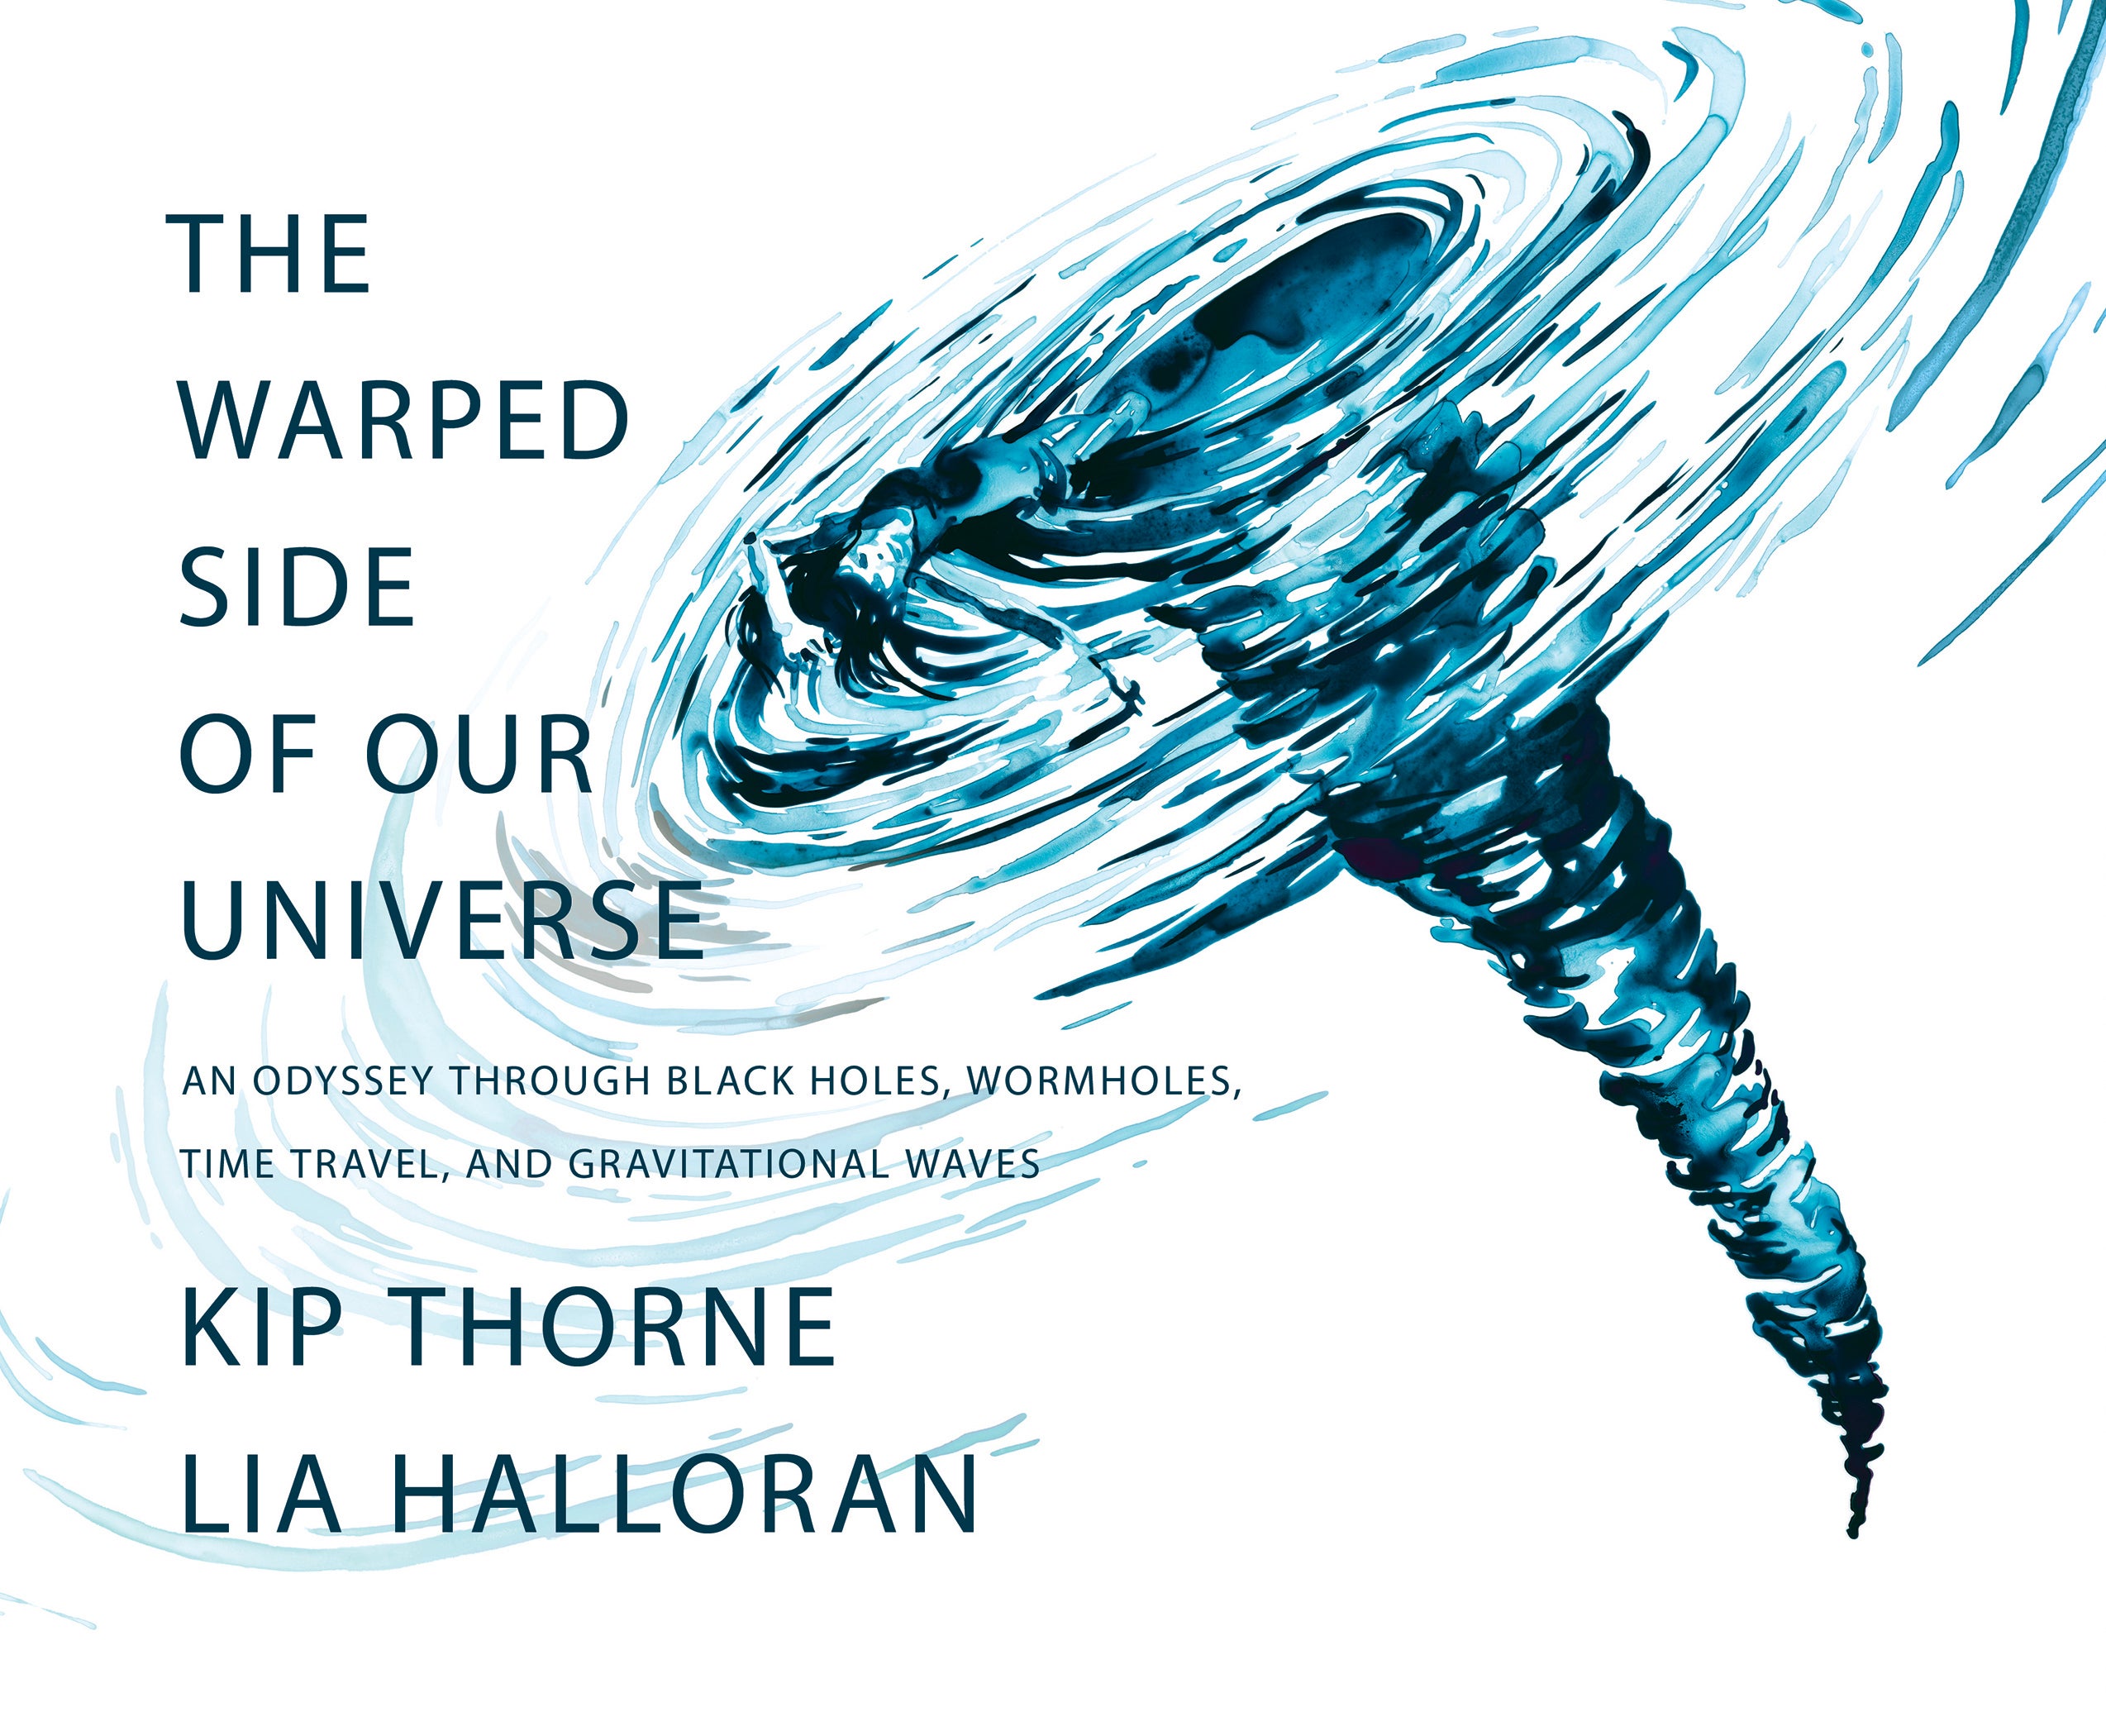 Book Review - The Warped Side of Our Universe